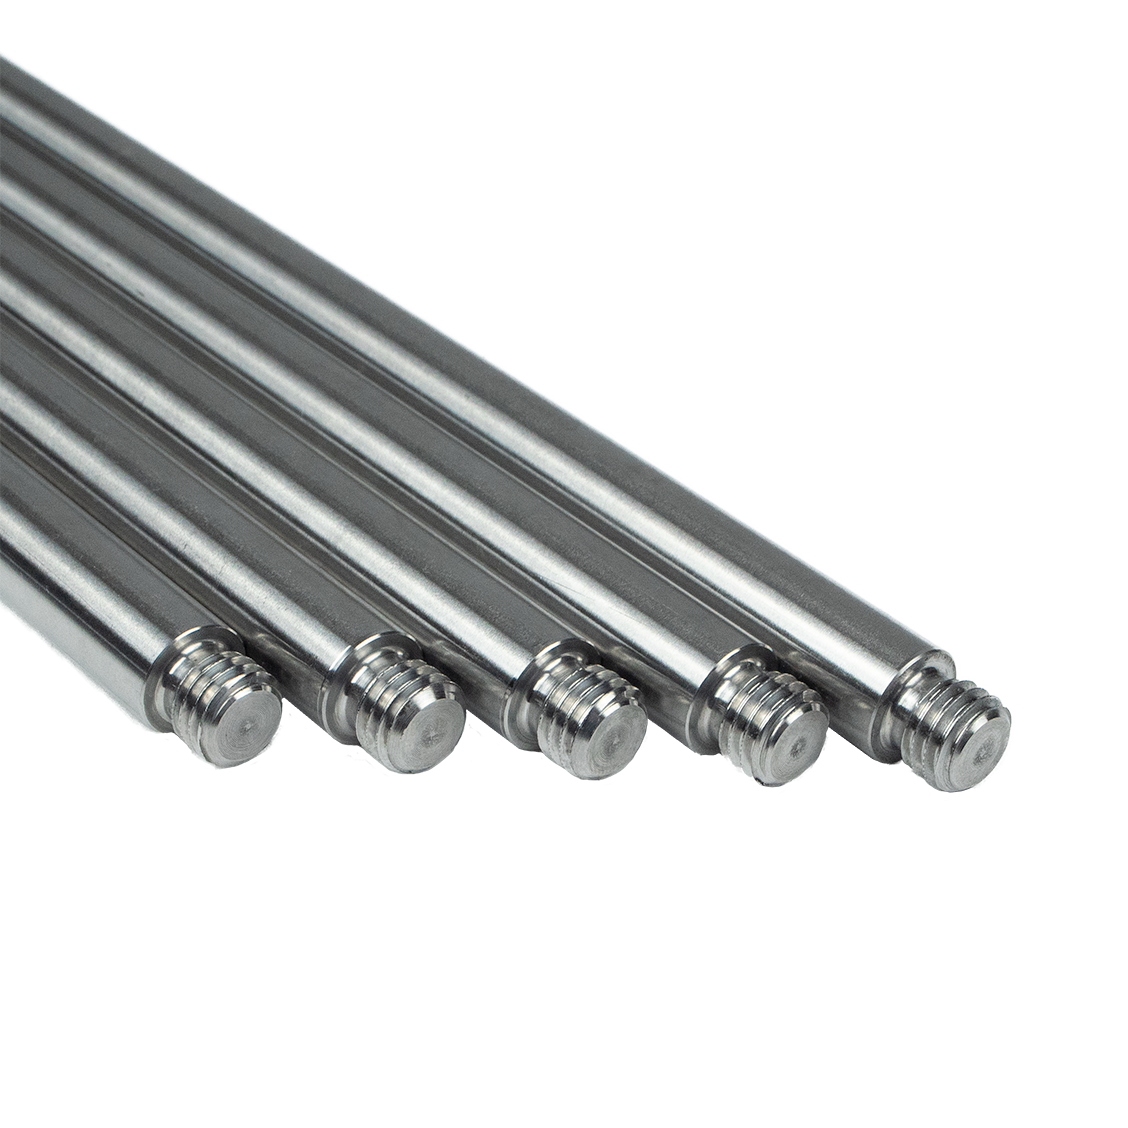 Threaded Stand Rod M10 - Ø 12 mm, length 1000 mm - stainless steel